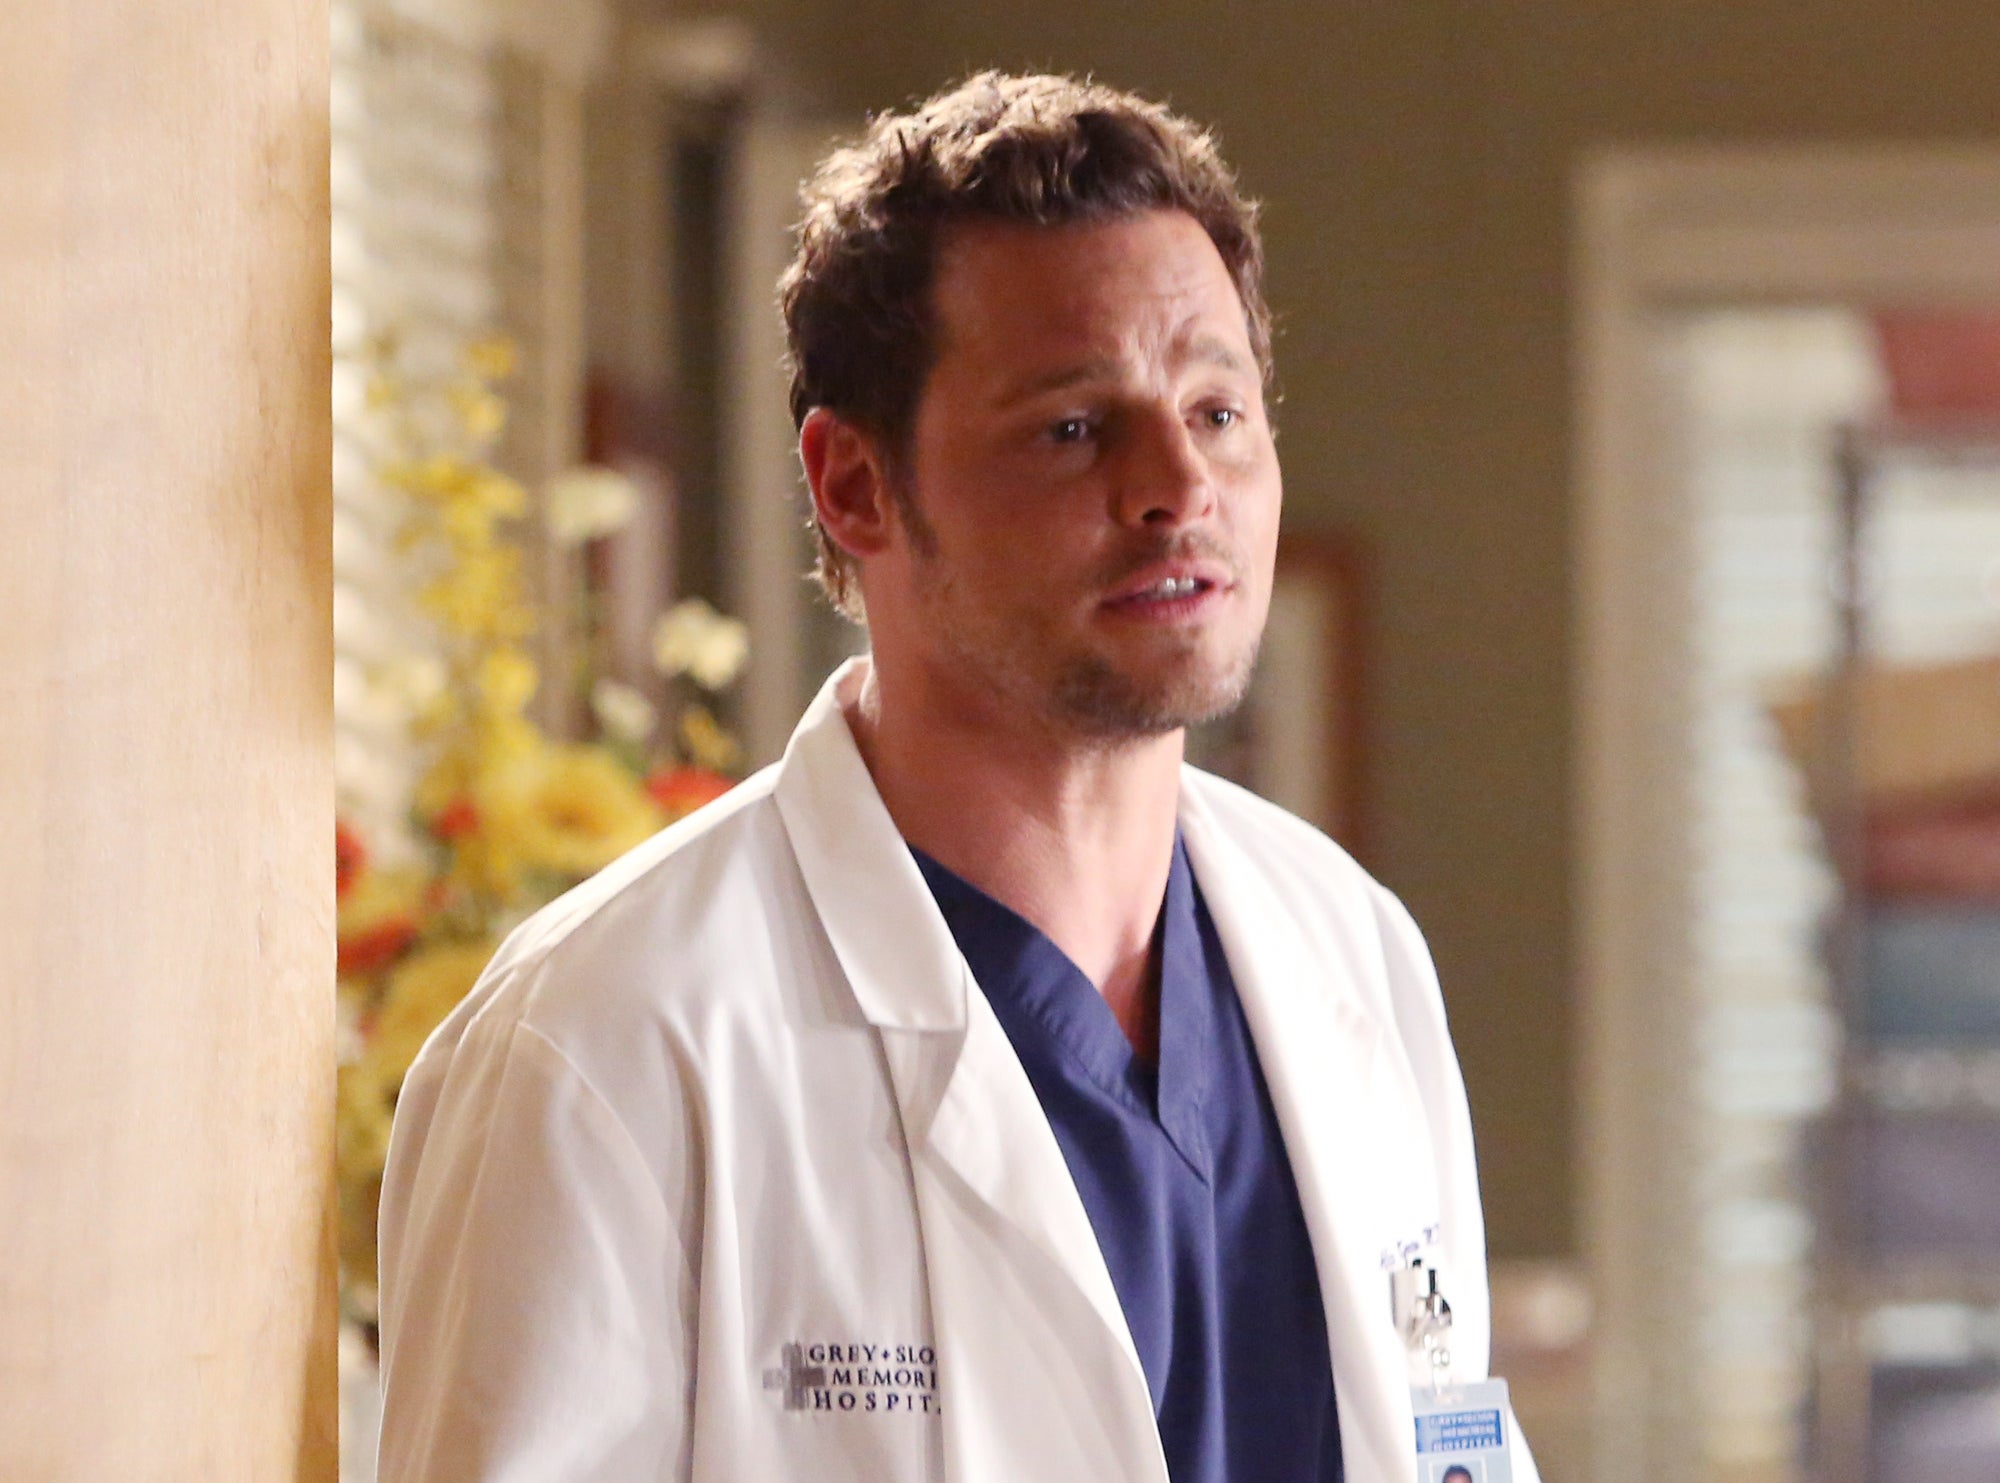 Actor in a white lab coat portraying Dr. Alex Karev on a TV show set, looking concerned